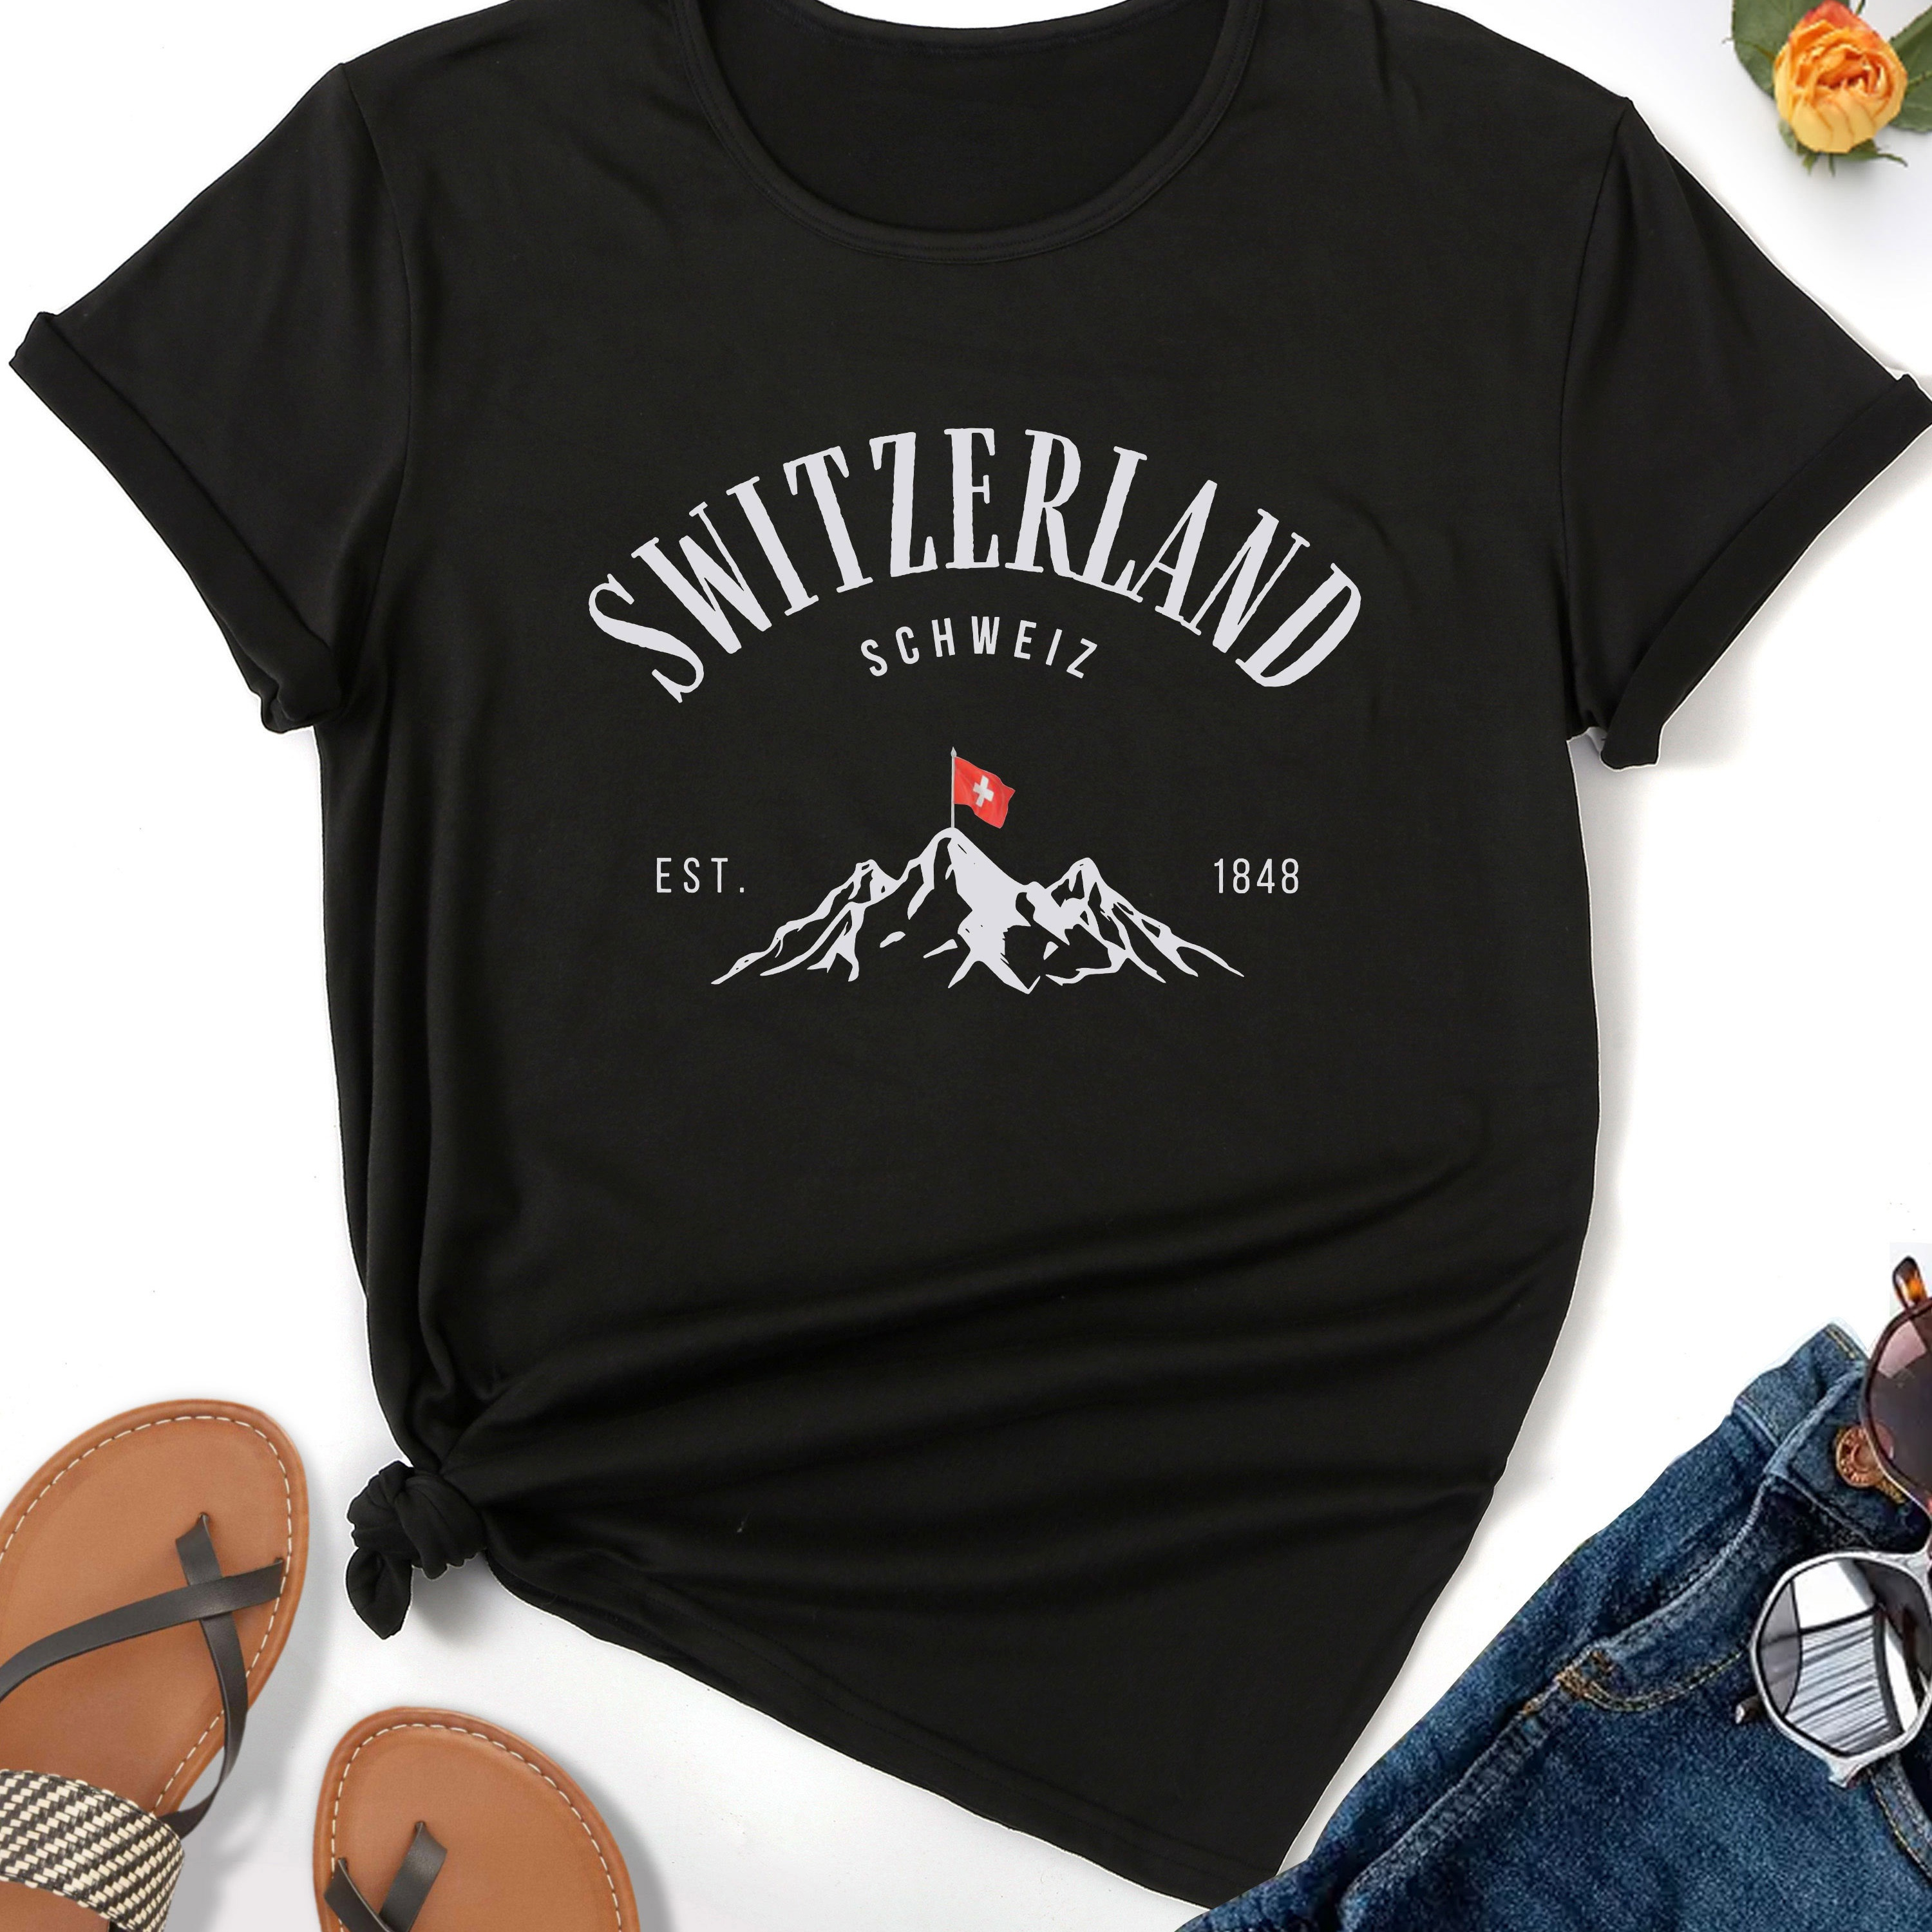 

Switzerland Print T-shirt, Casual Crew Neck Short Sleeve Top For Spring & Summer, Women's Clothing